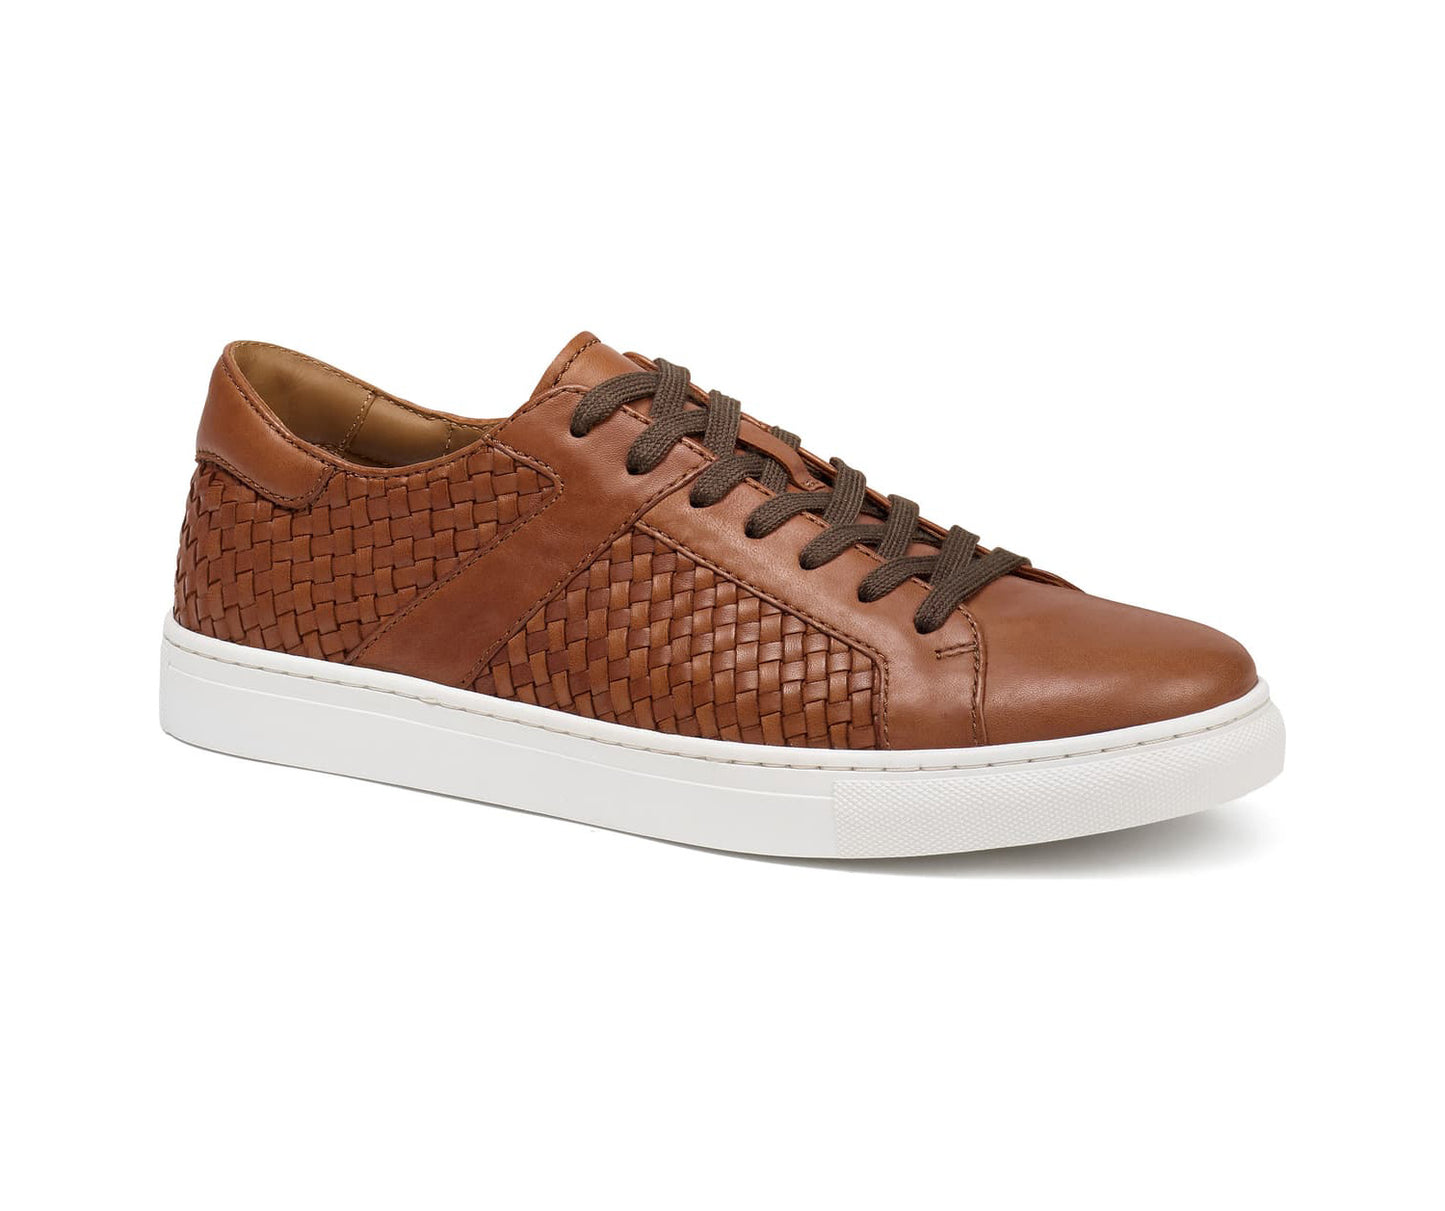 Brown Tan Braided Leather Low Top Lace Up Sneaker for Men. White Comfortable Cup Sole.